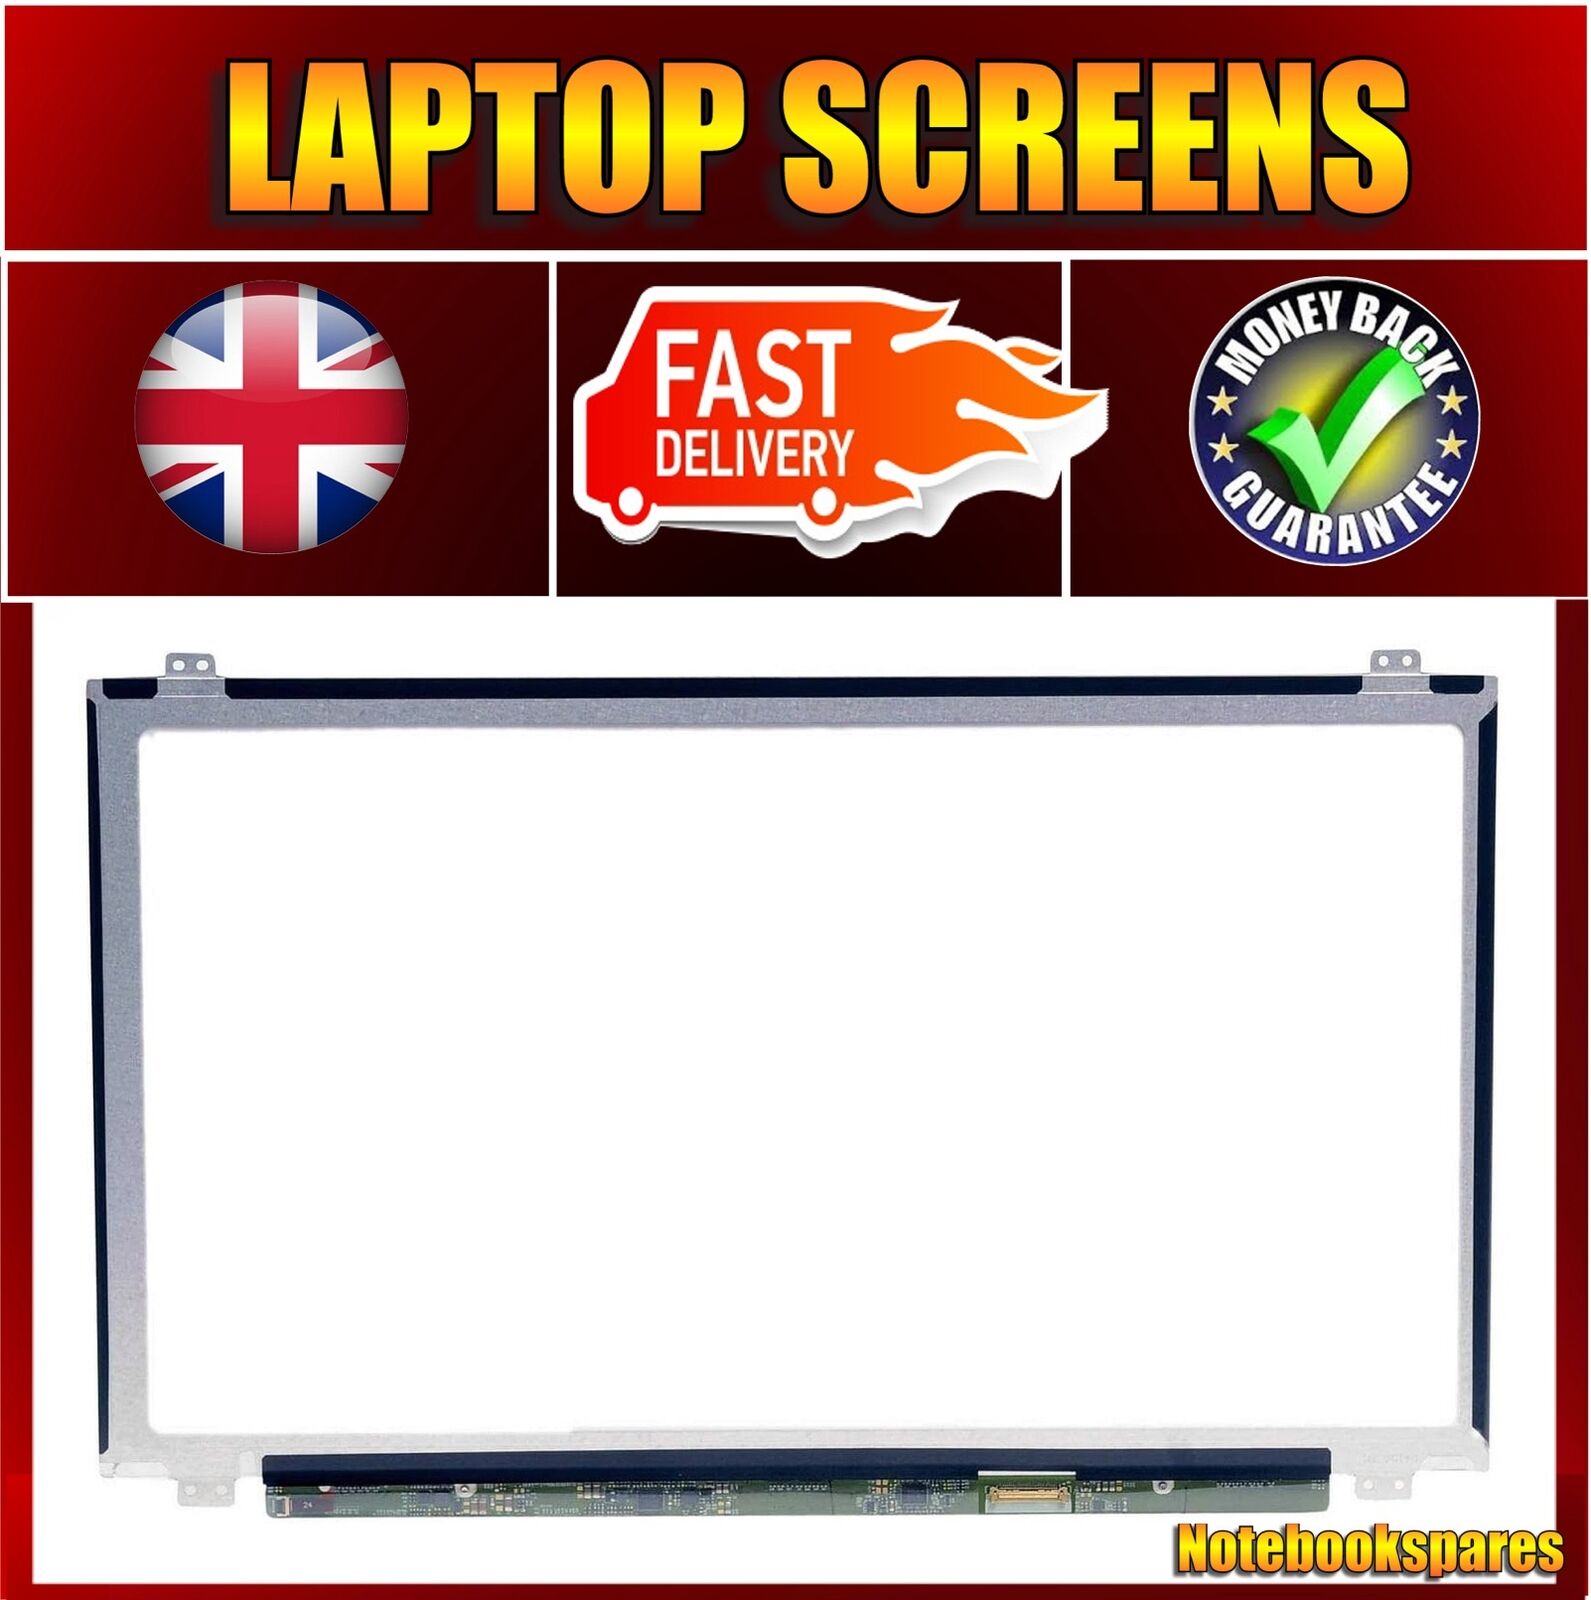 MSI GL62M 7RD 001JP 15.6" LED LCD Notebook Non IPS Screen FHD Matte Display UK